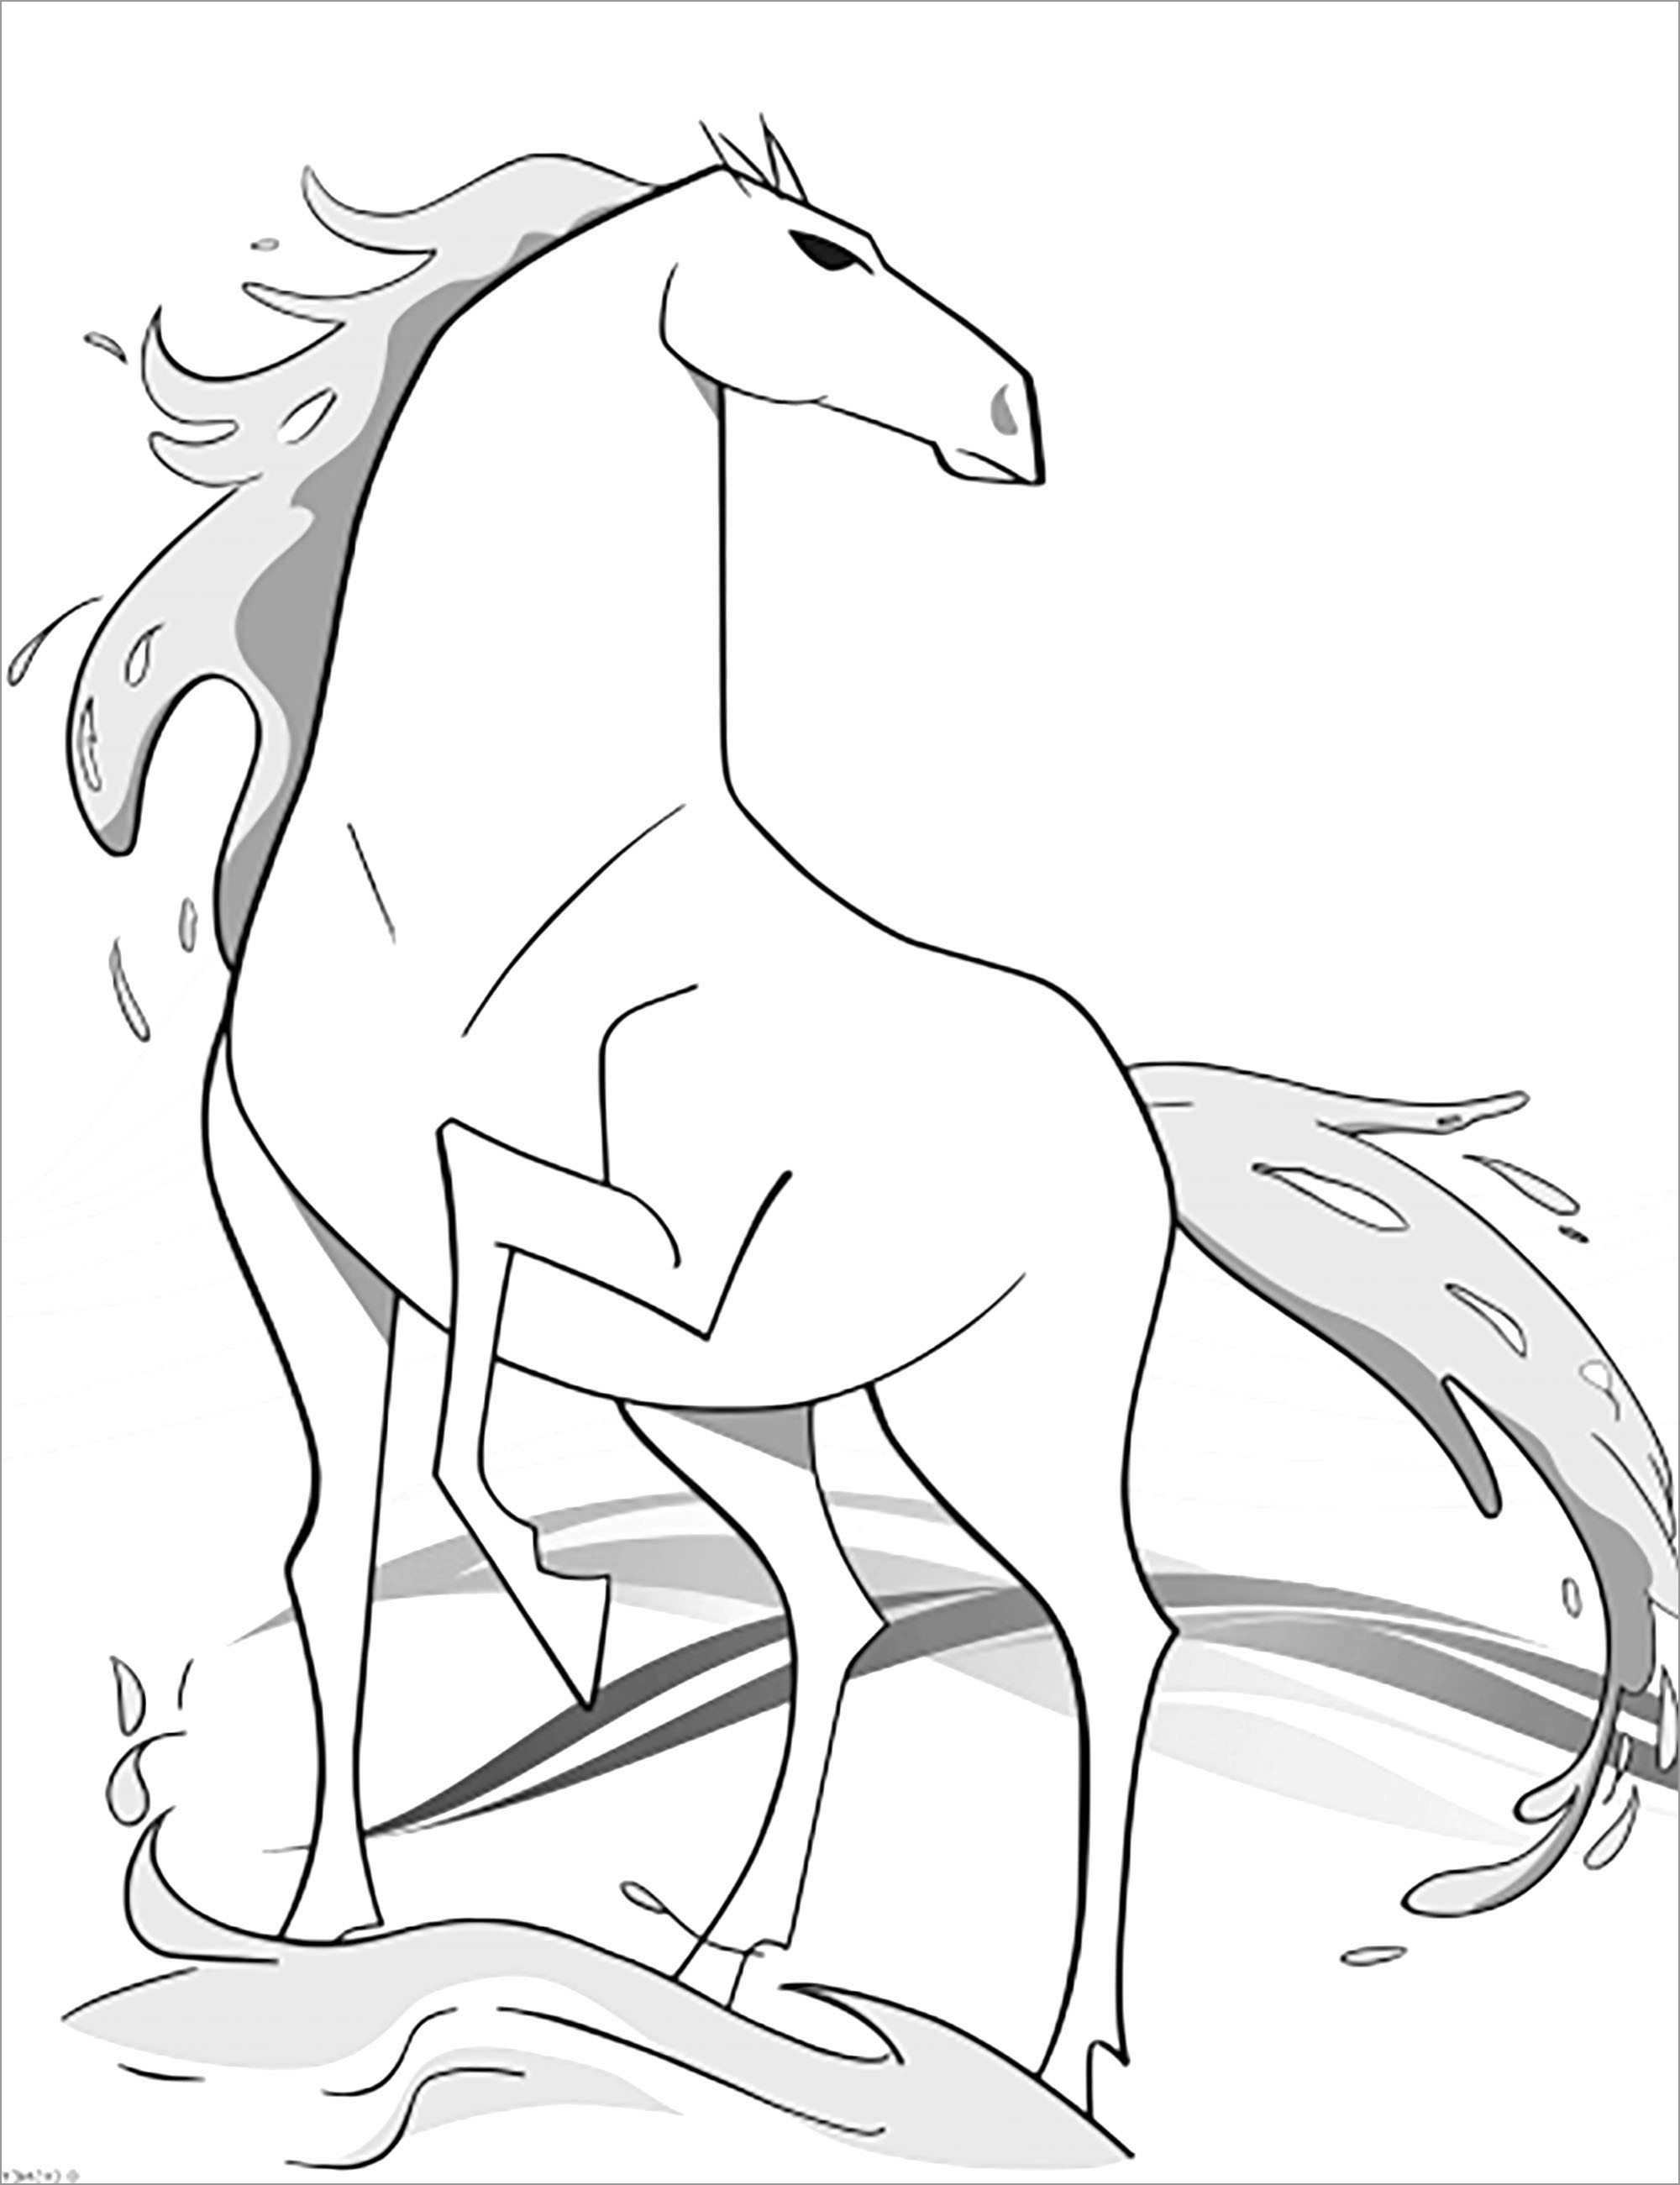 Frozen Water Horse Coloring Page